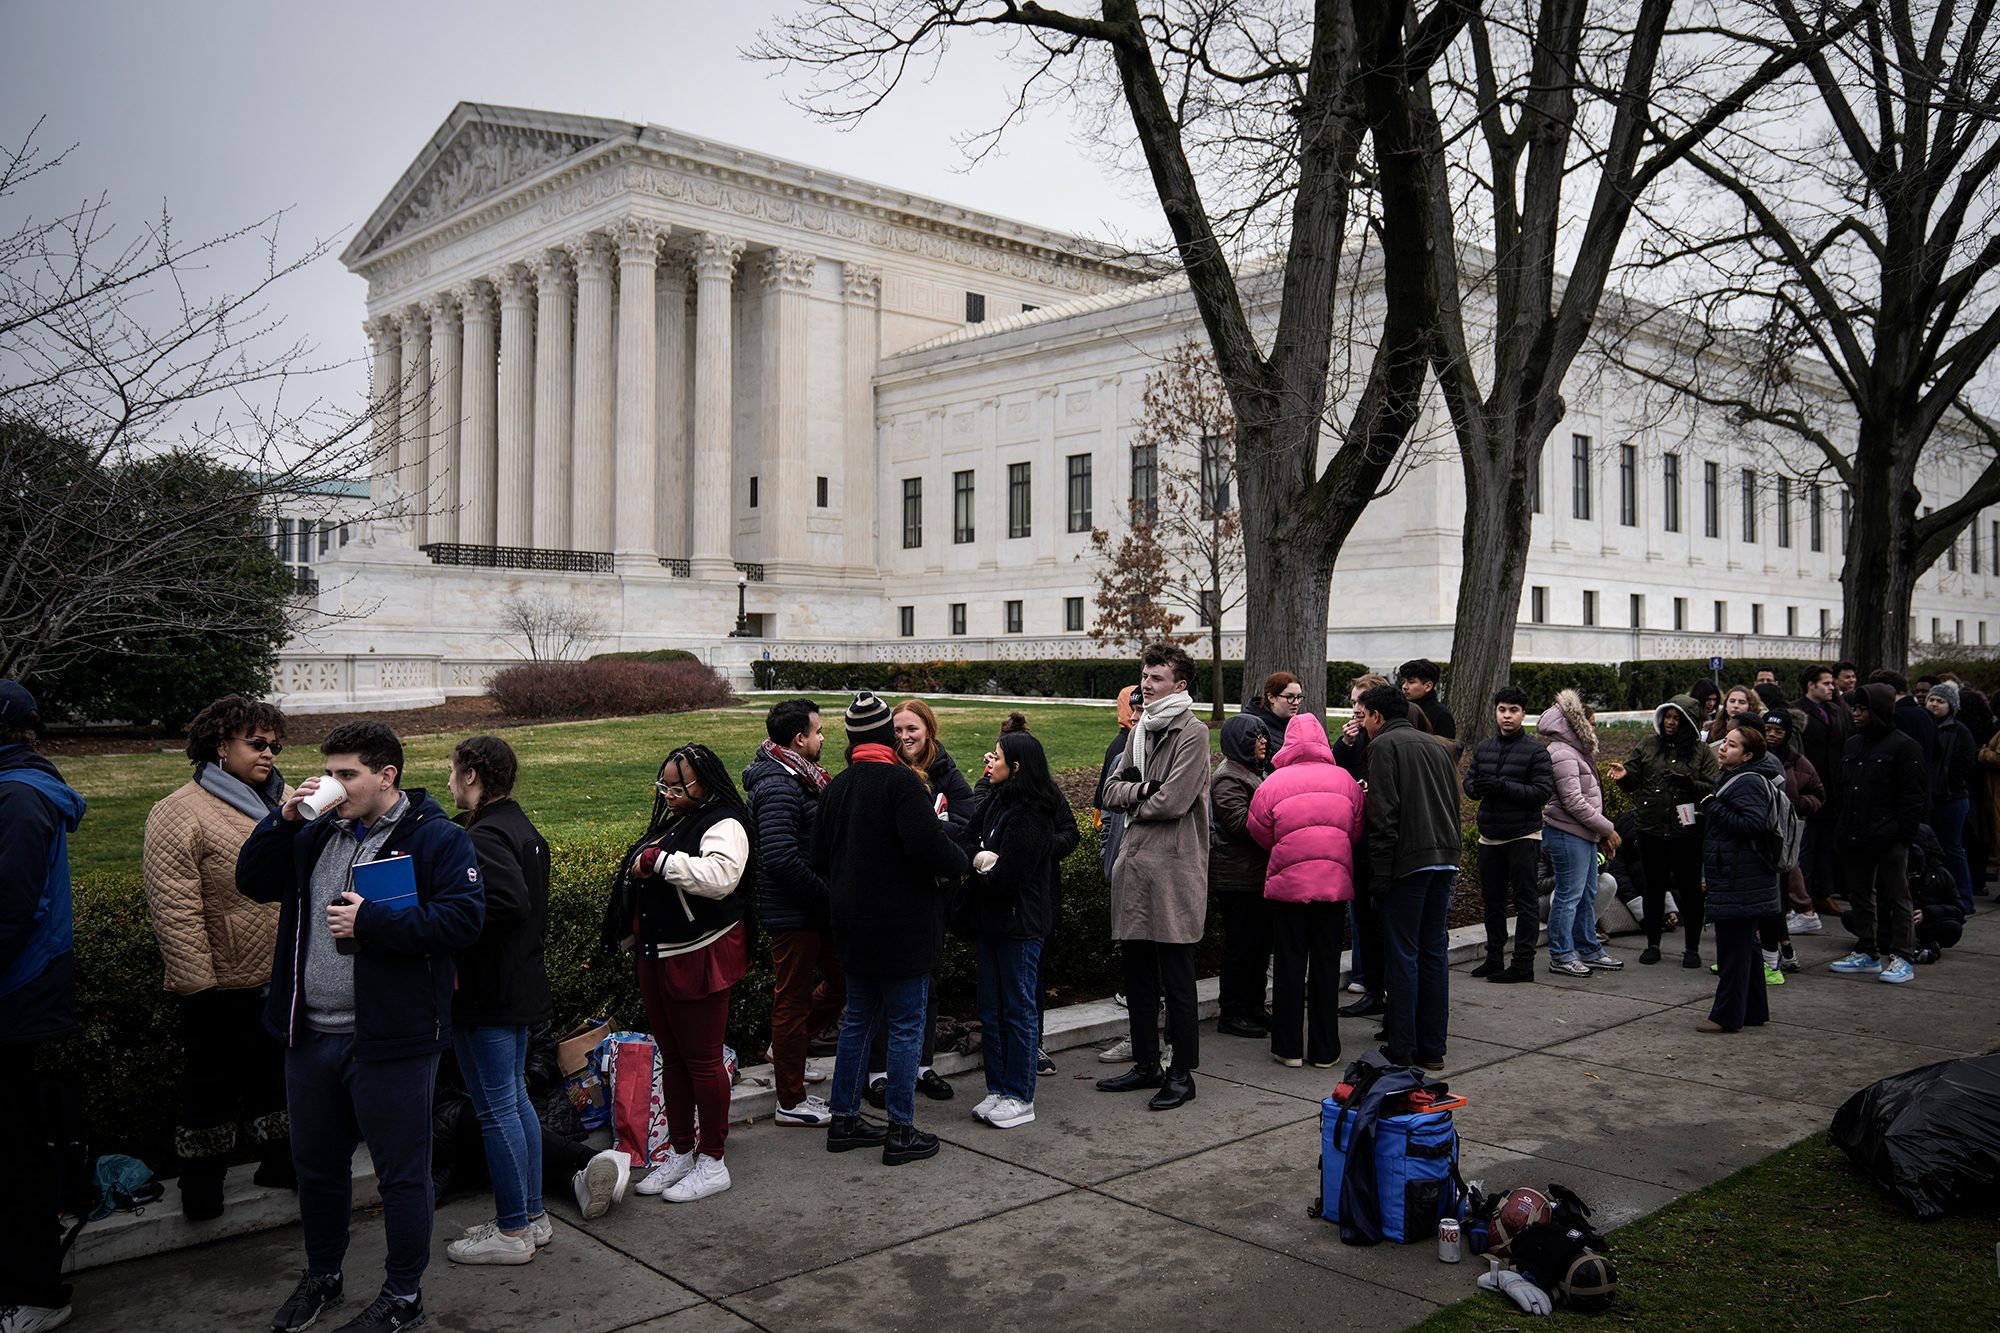 People wait in line to enter the Supreme Court to hear oral arguments on February 28 in Washington, DC.